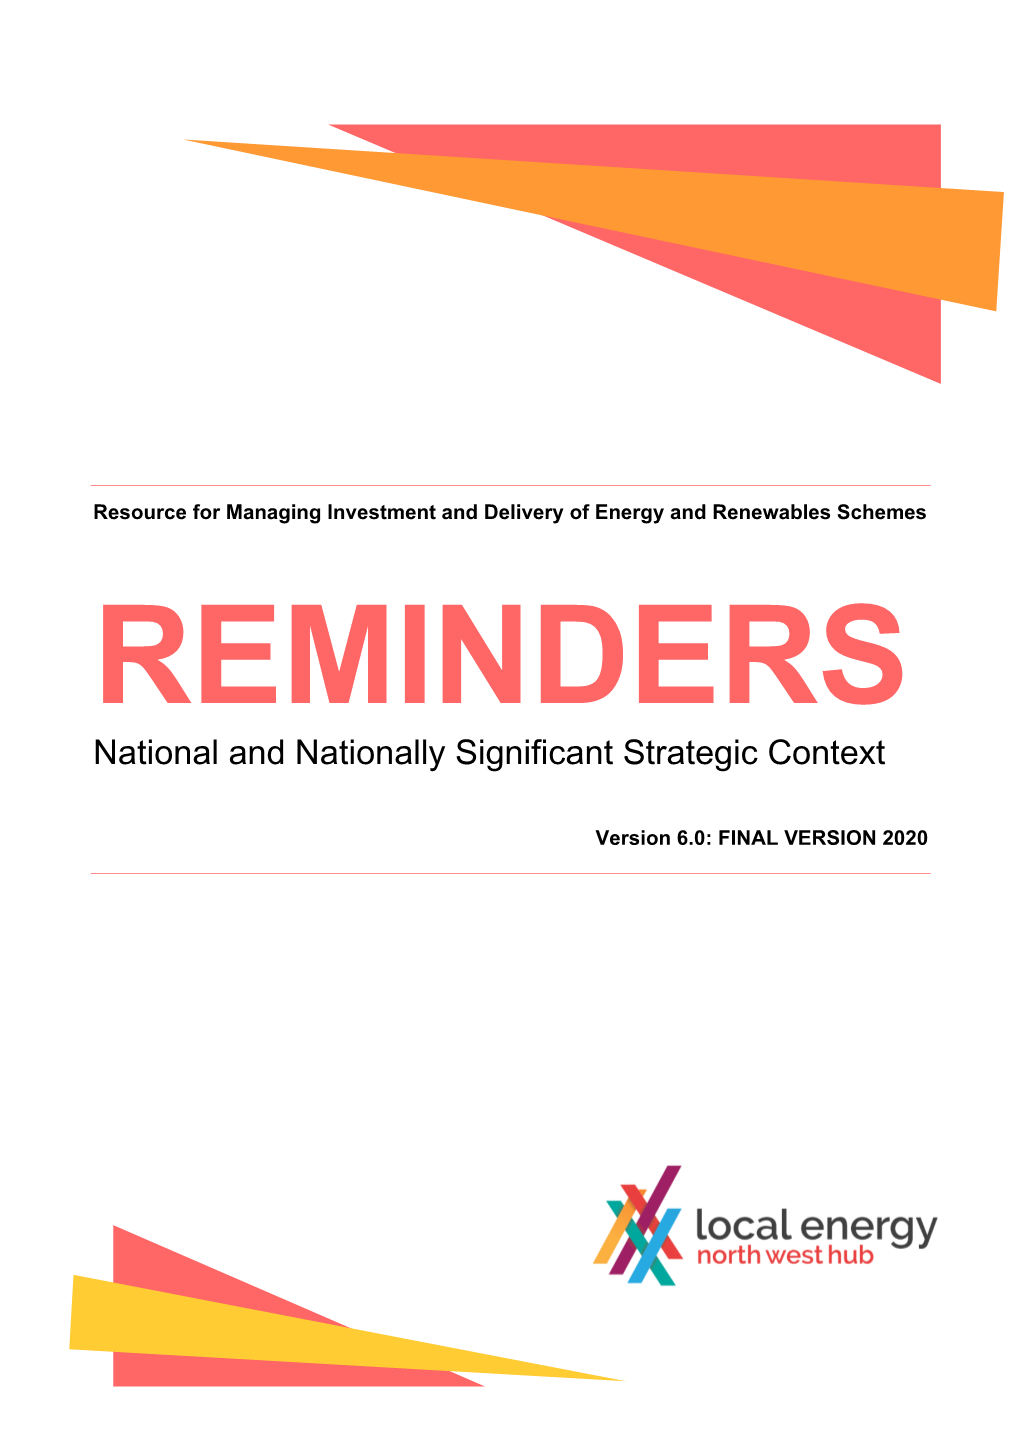 National and Nationally Significant Strategic Context